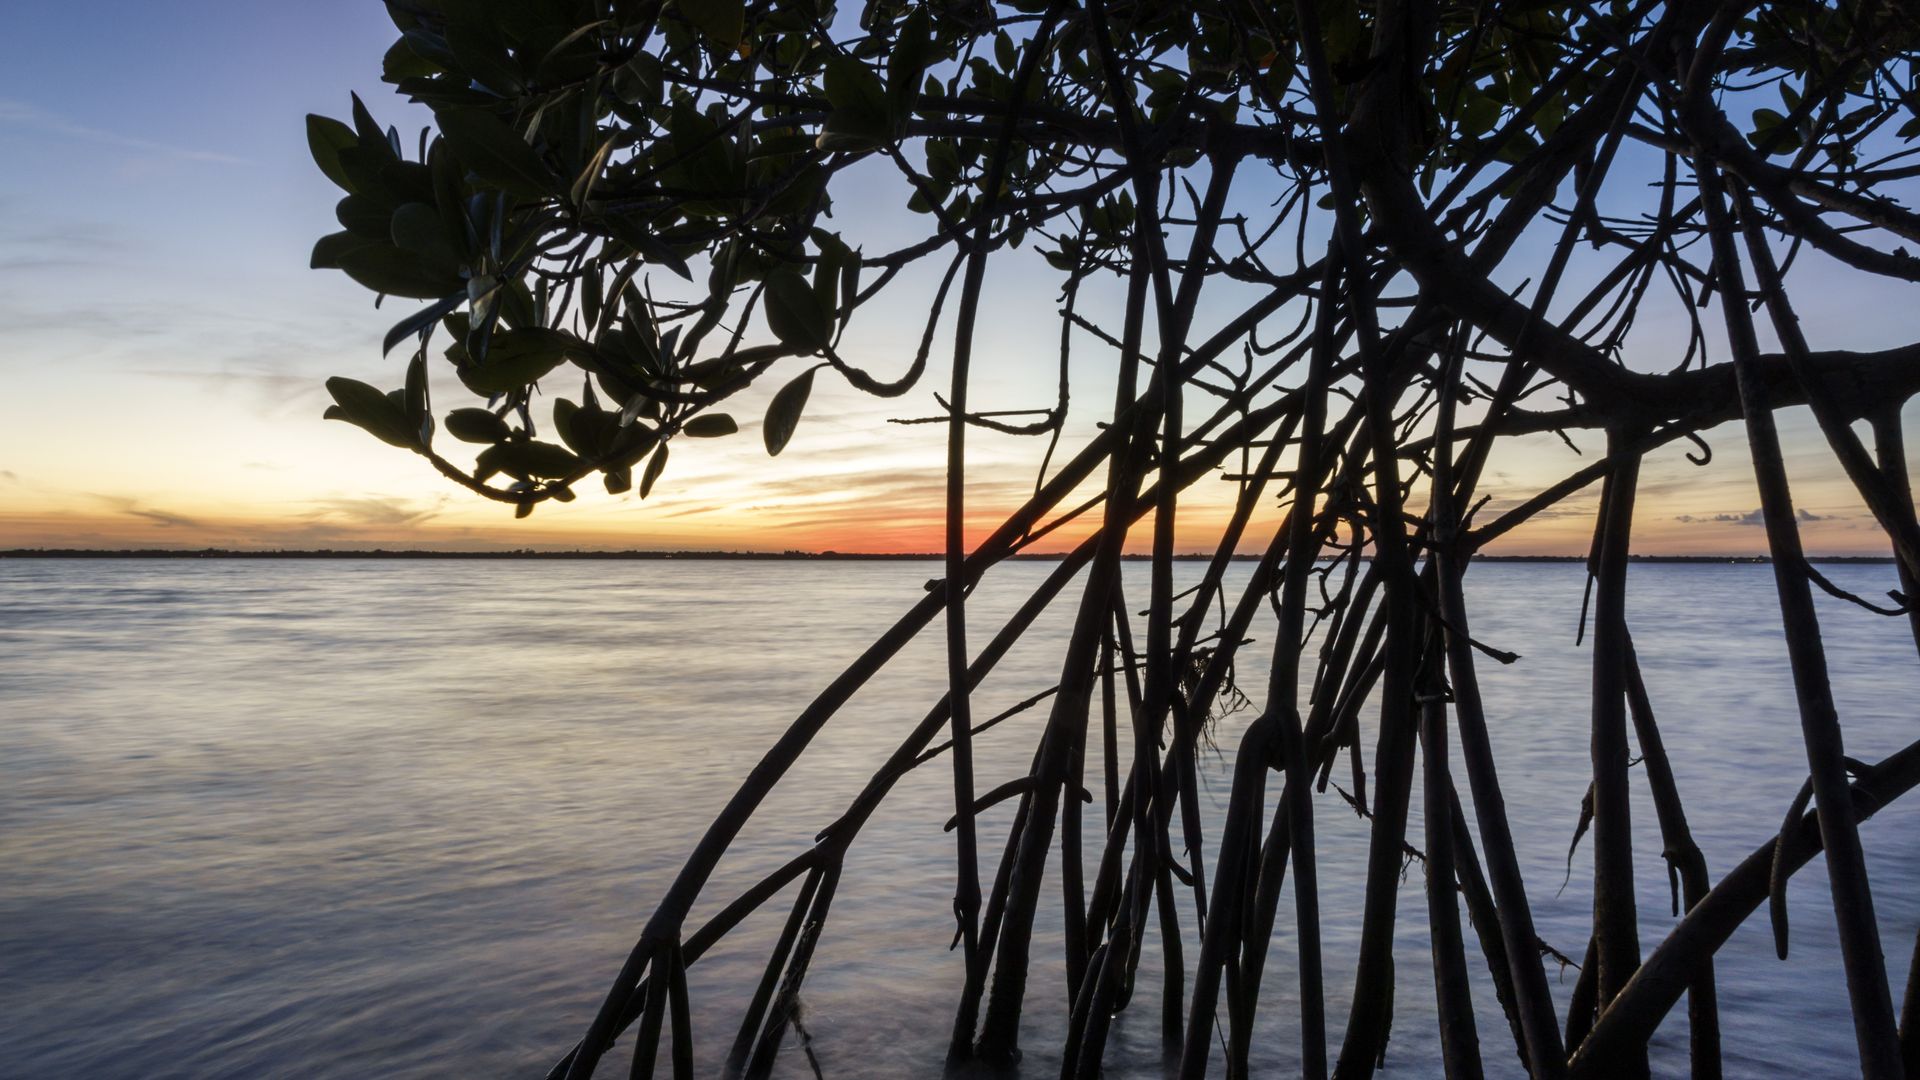 A mangrove tree with spindly roots is silhouetted against a blue and orange sunset 